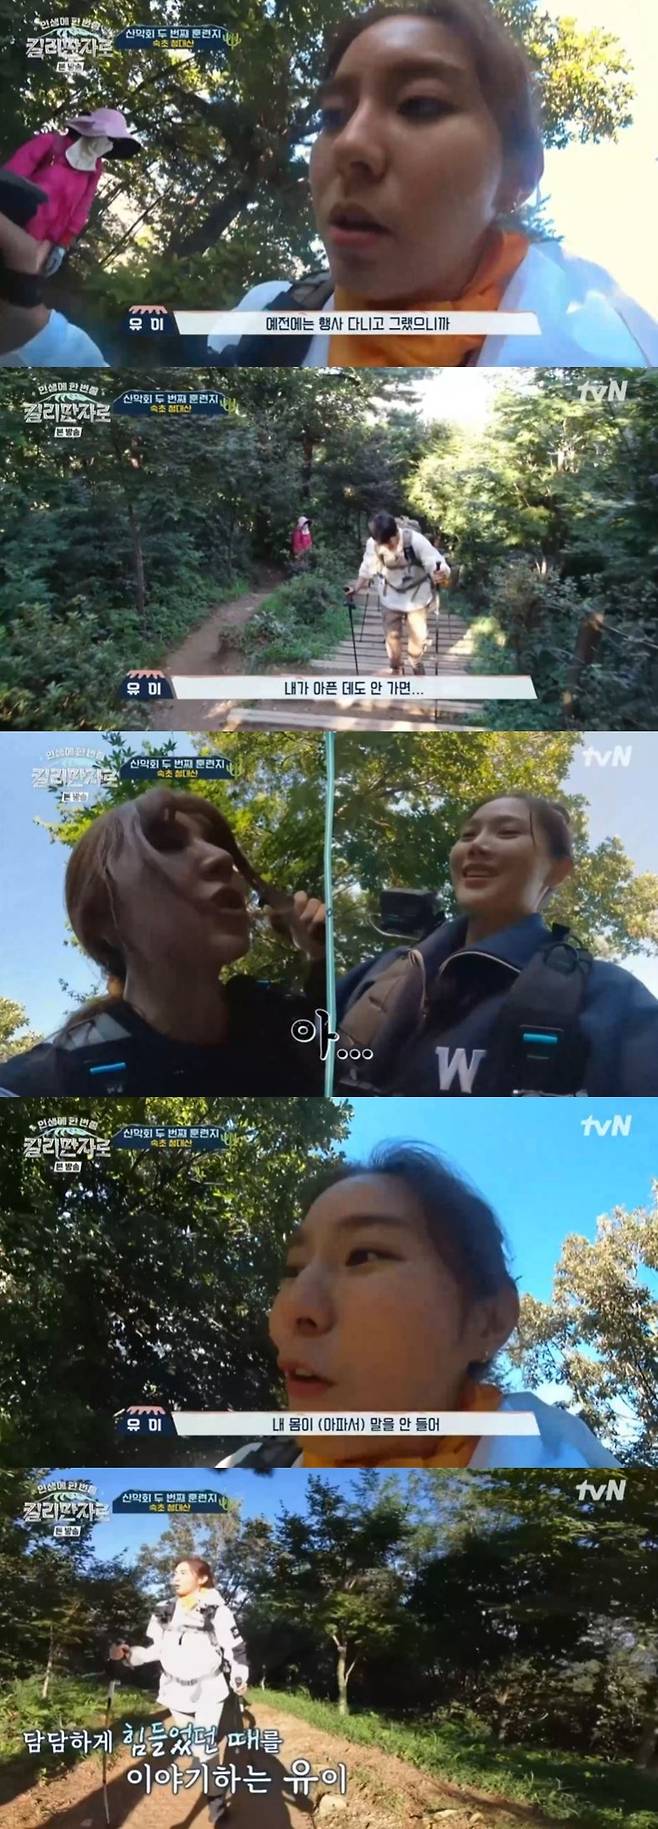 Uee revealed his difficulties as a singer.At least once in the life of tvN aired on October 29, members who started their journey to Kilimanjaro got on the air in Kilimanjaro!On this day, Yoon Eun-hye, Son ho joon, Uee, and Choi Hyo-jung went to Climbing to prepare for the full-scale Kilimanjaro.The four then talked about if there was a difficult moment in life. Uee said, Because I went to an event and I did not go when I was sick.Yoon Eun-hye and Choi Hyo-jung, who have a consensus on girl group activities, did not even finish speaking, but they knew what to say.My body wouldnt listen, I wouldnt dance, I was in tears on stage, and I had to do it, Uee said.Im hiding that feeling, and Choi Hyo-jung nodded.Son ho joon caught his eye as he steals his eyes, but he laughed, saying, Im sweating, but I might come out crying.On the other hand, Kilimanjaro! Is a program that depicts the romance of young stars who are sincere in the mountains.